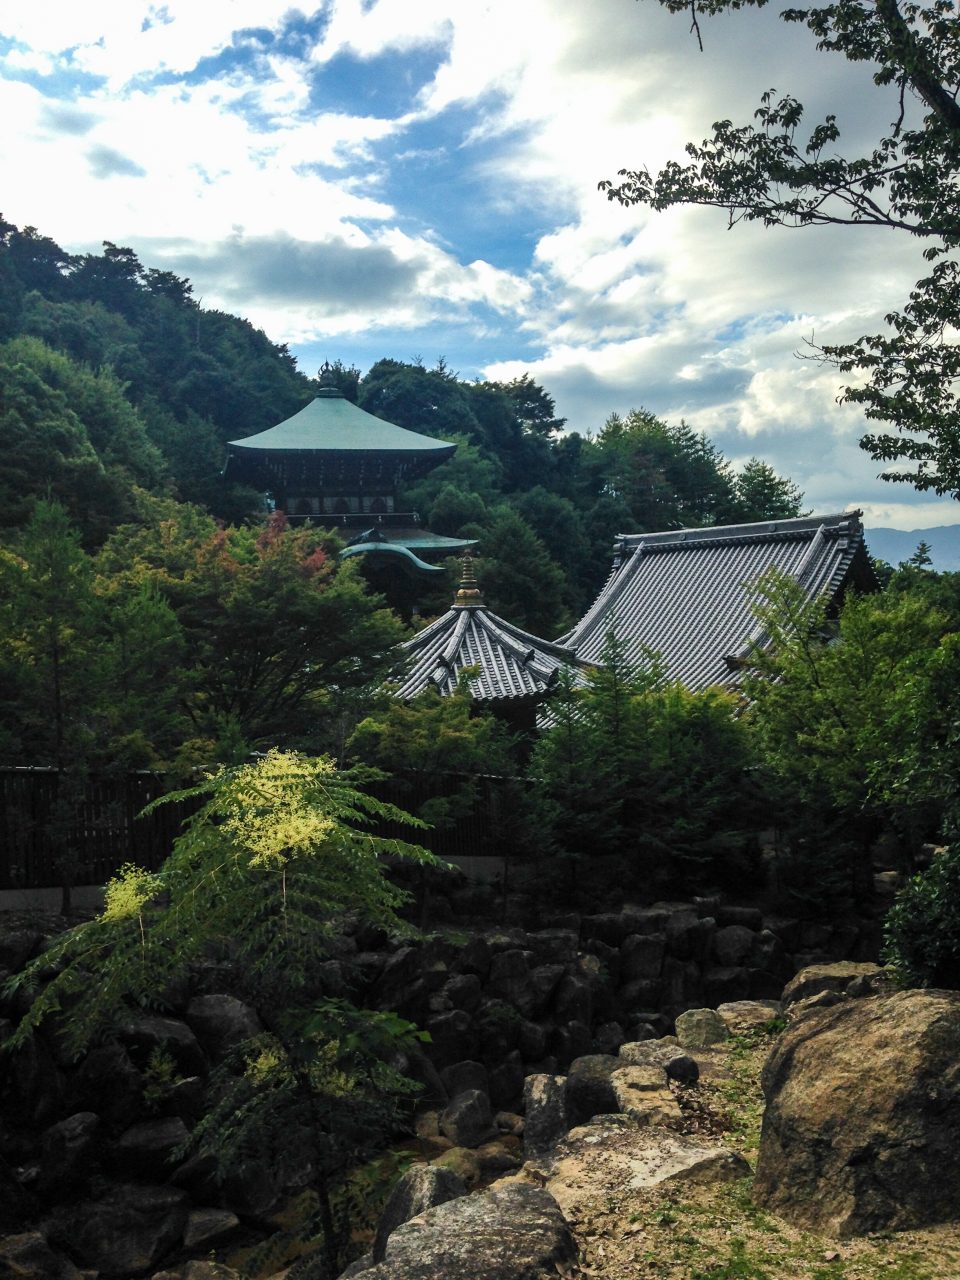 Daisho-in Temple